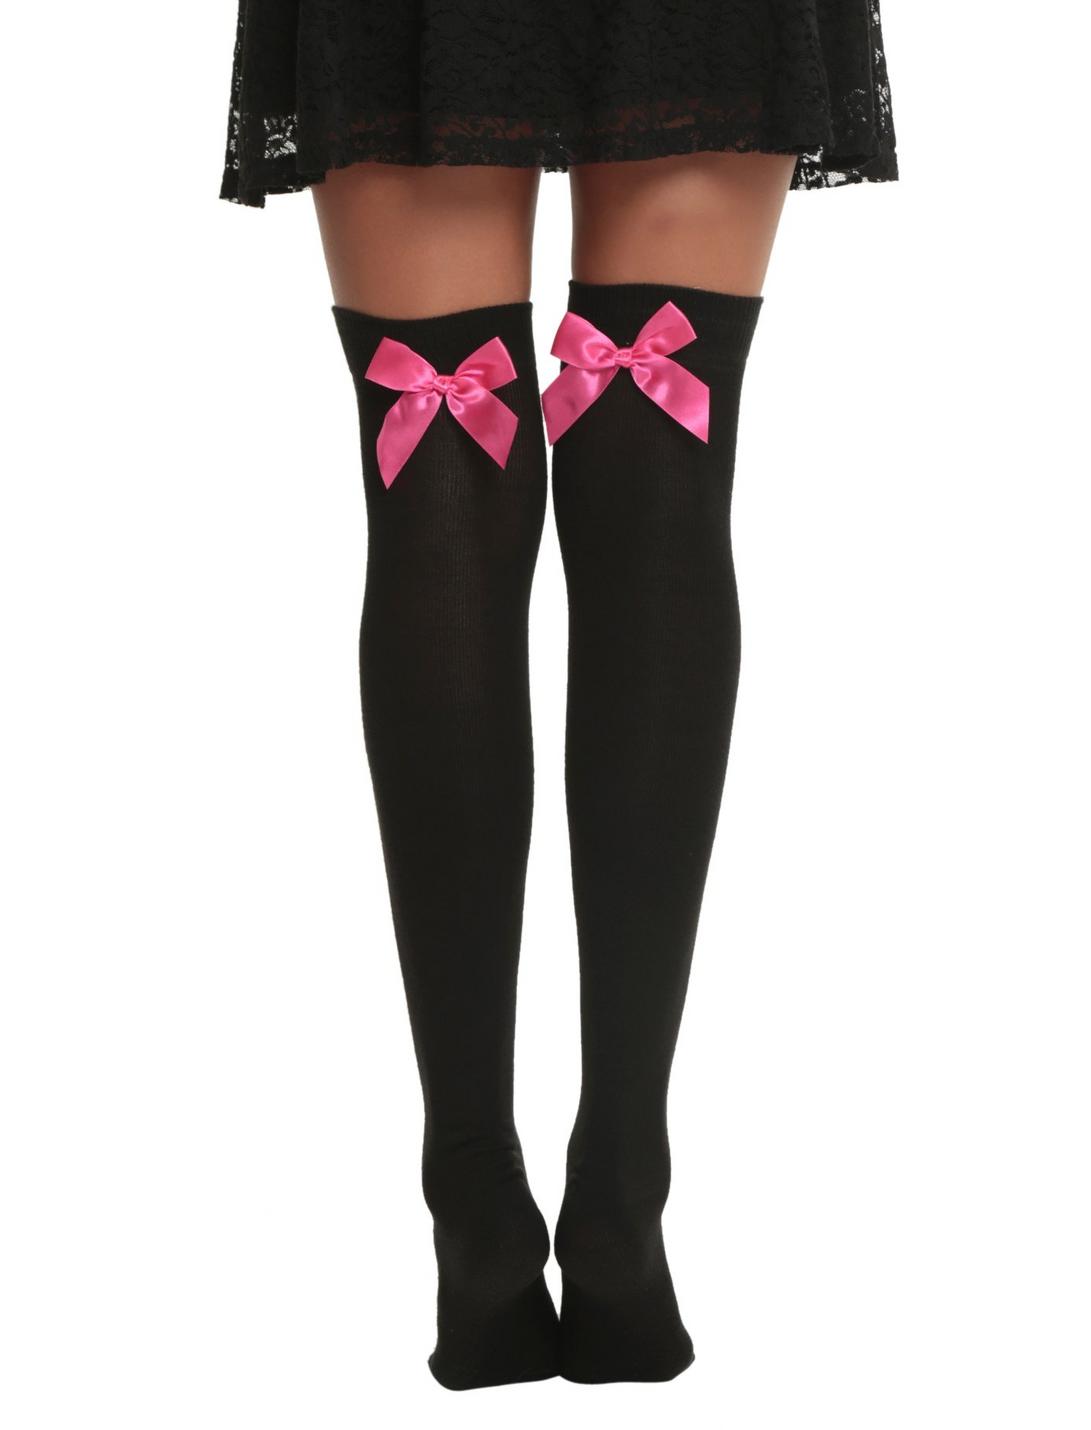 LOVEsick Black And Pink Bow Over-The-Knee Socks, , hi-res